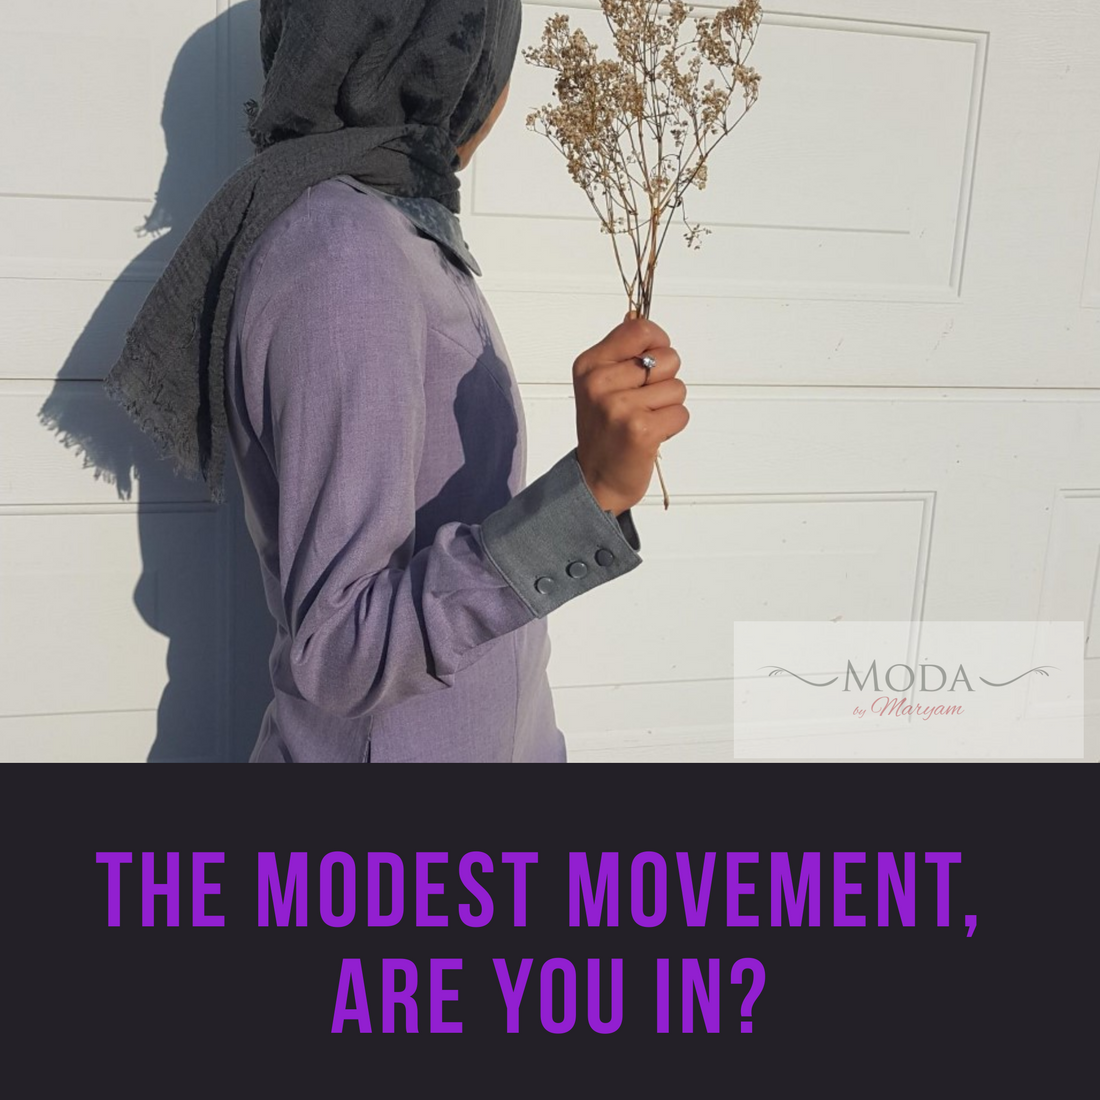 THE MODEST MOVEMENT, ARE YOU IN?